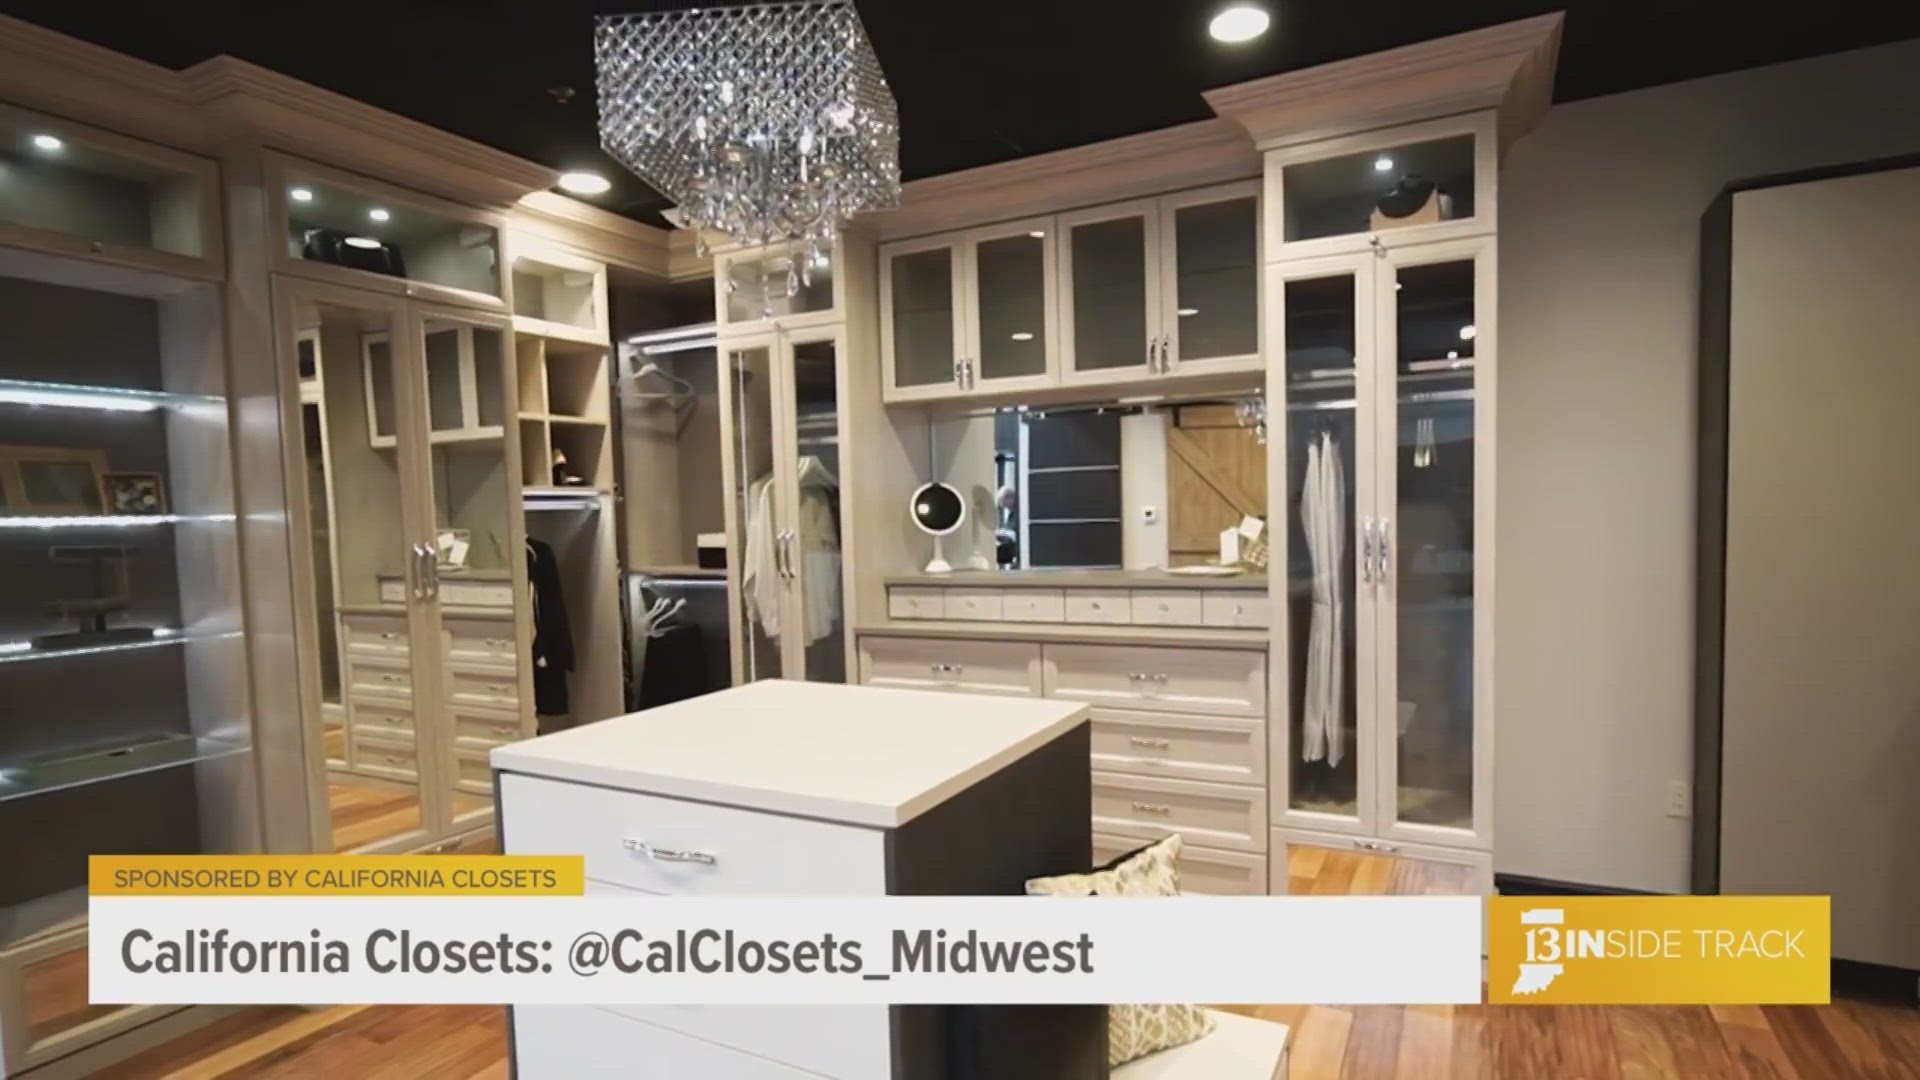 From outdoor living spaces, large closets, and kitchen pantries with plenty of storage, see how California Closets can help optimize your living space.